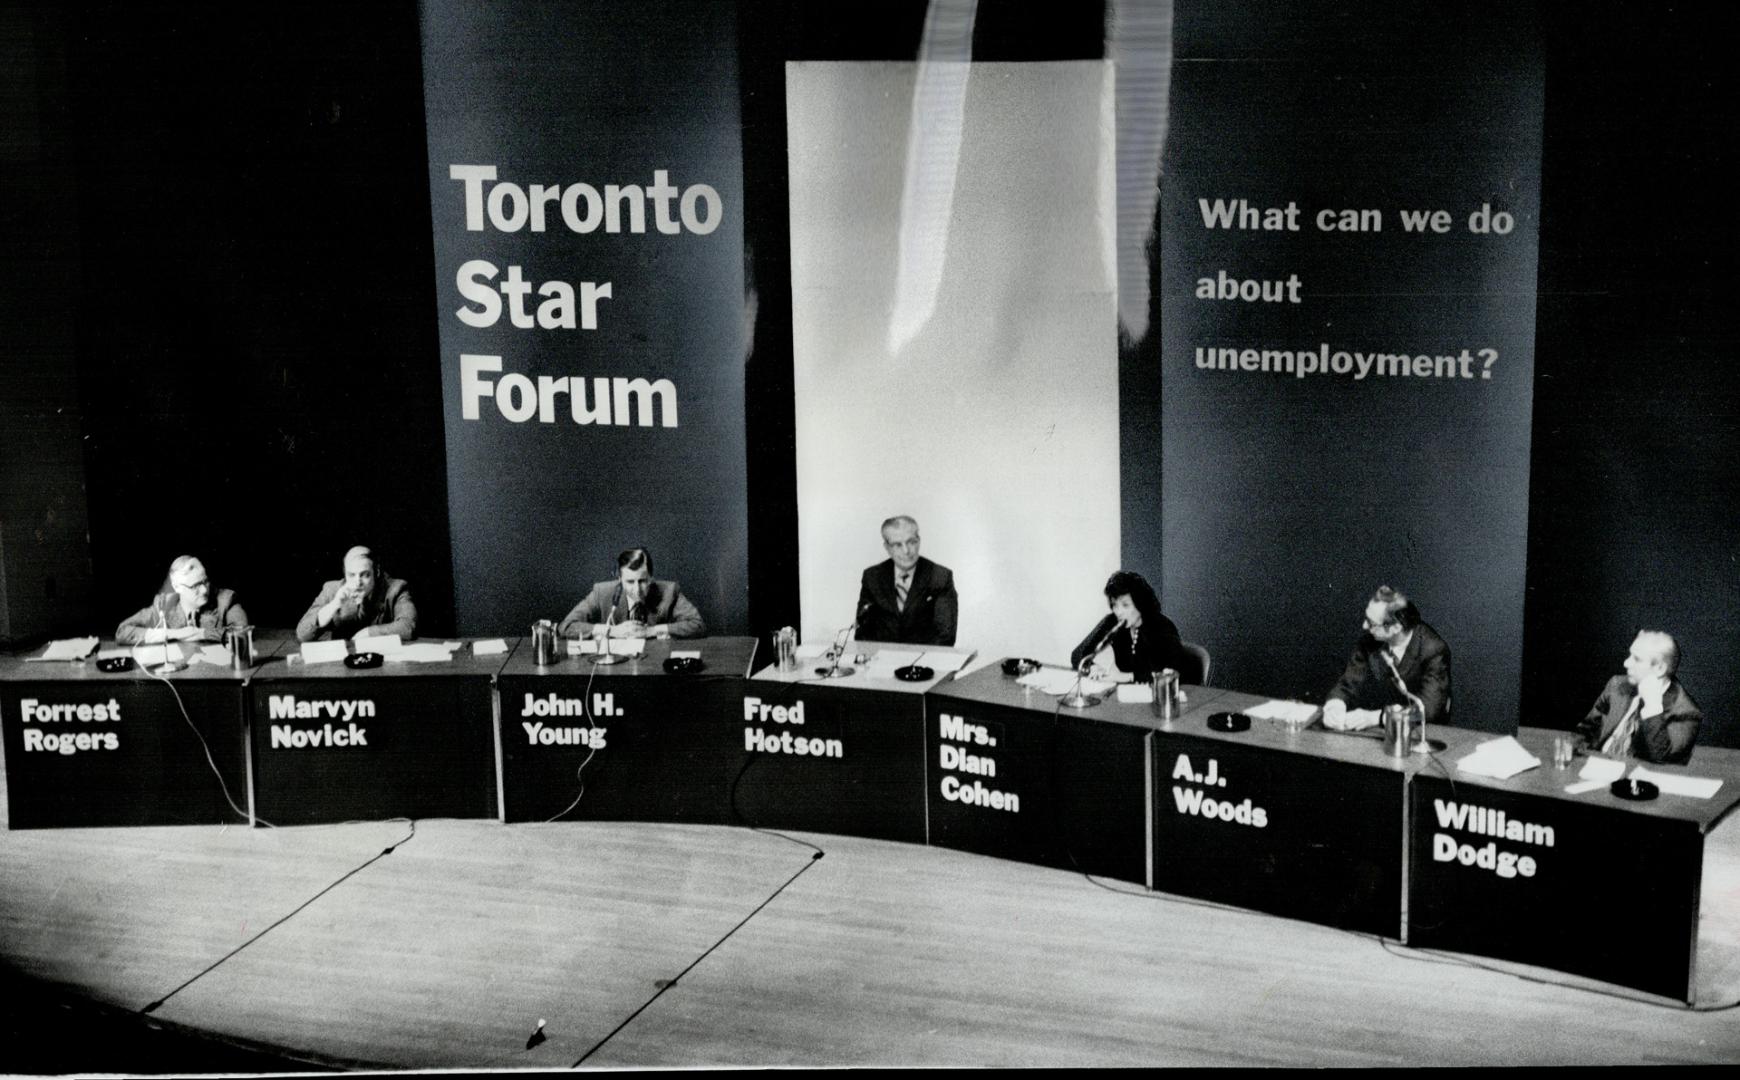 Panelists at The Toronto Star Forum on unemployment held last night were, from left